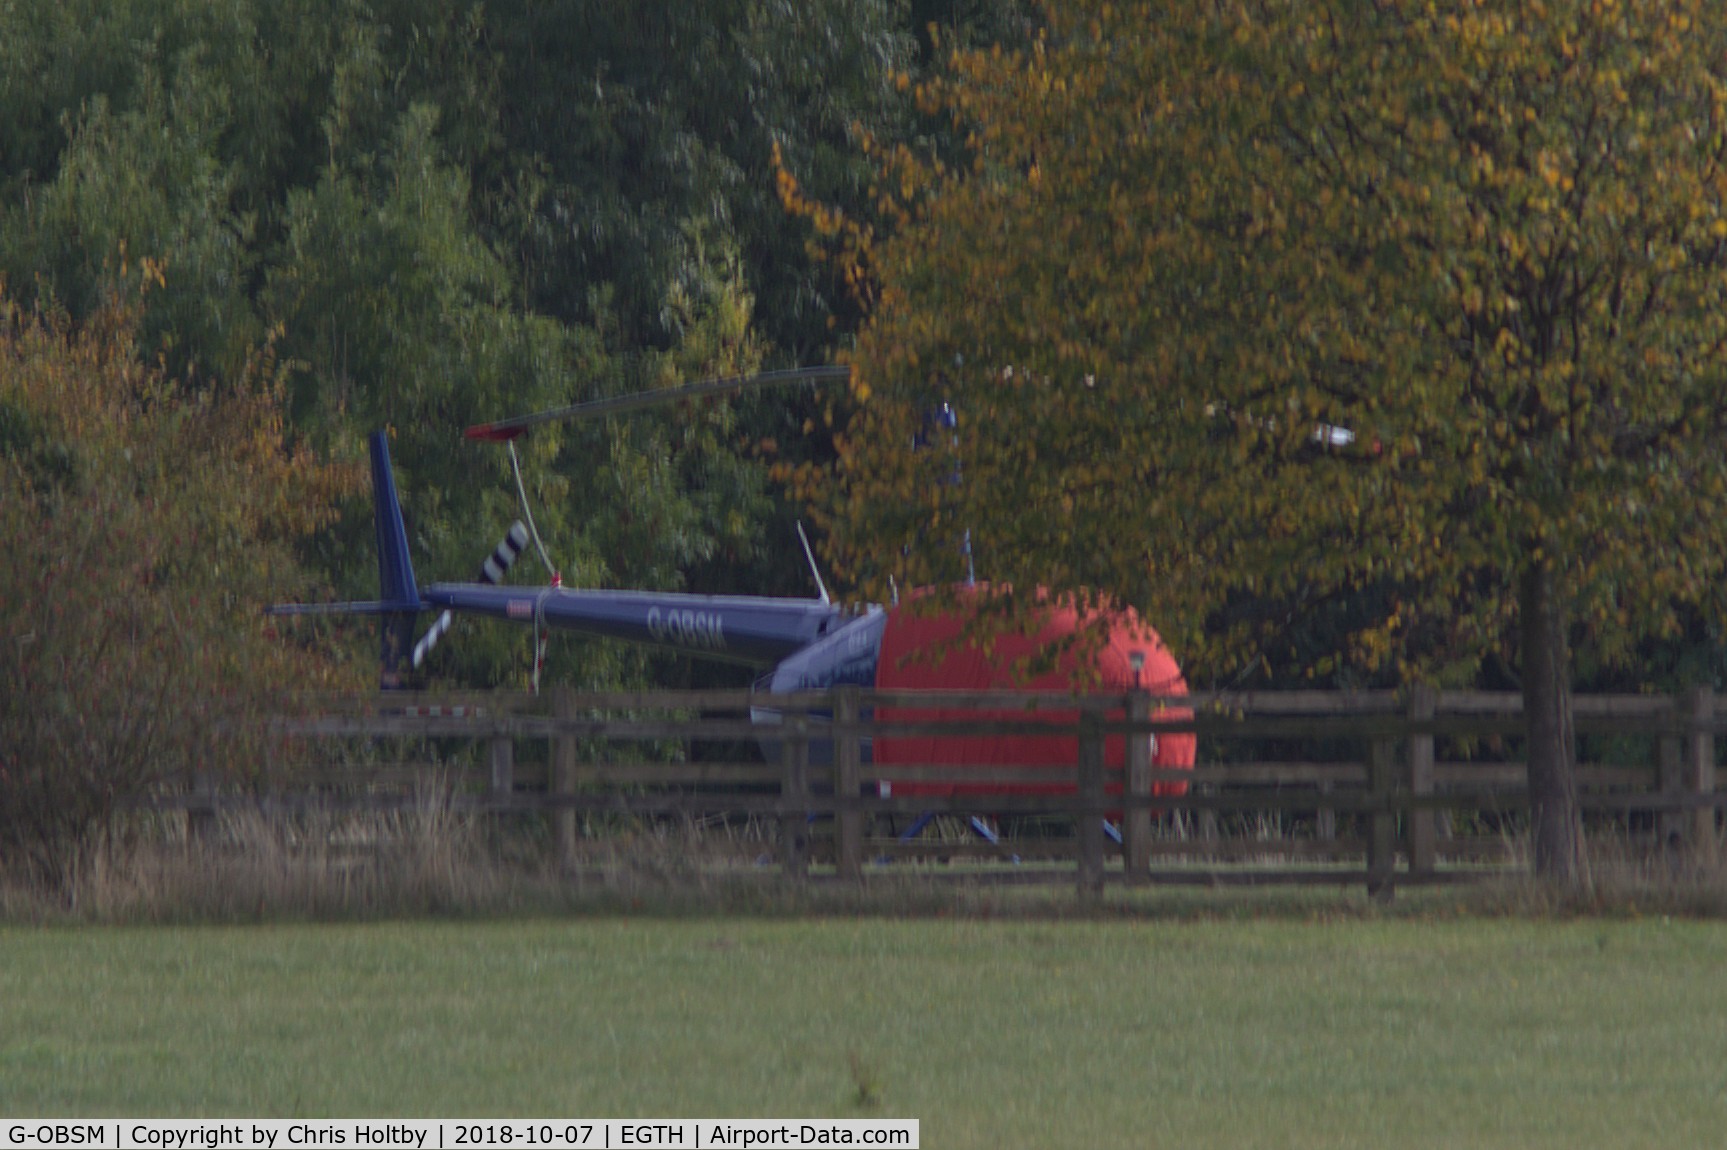 G-OBSM, 2001 Robinson R44 Raven C/N 1030, Parked and covered in private garden neighbouring Old Warden airfield on far side of main runway. Note change of livery.